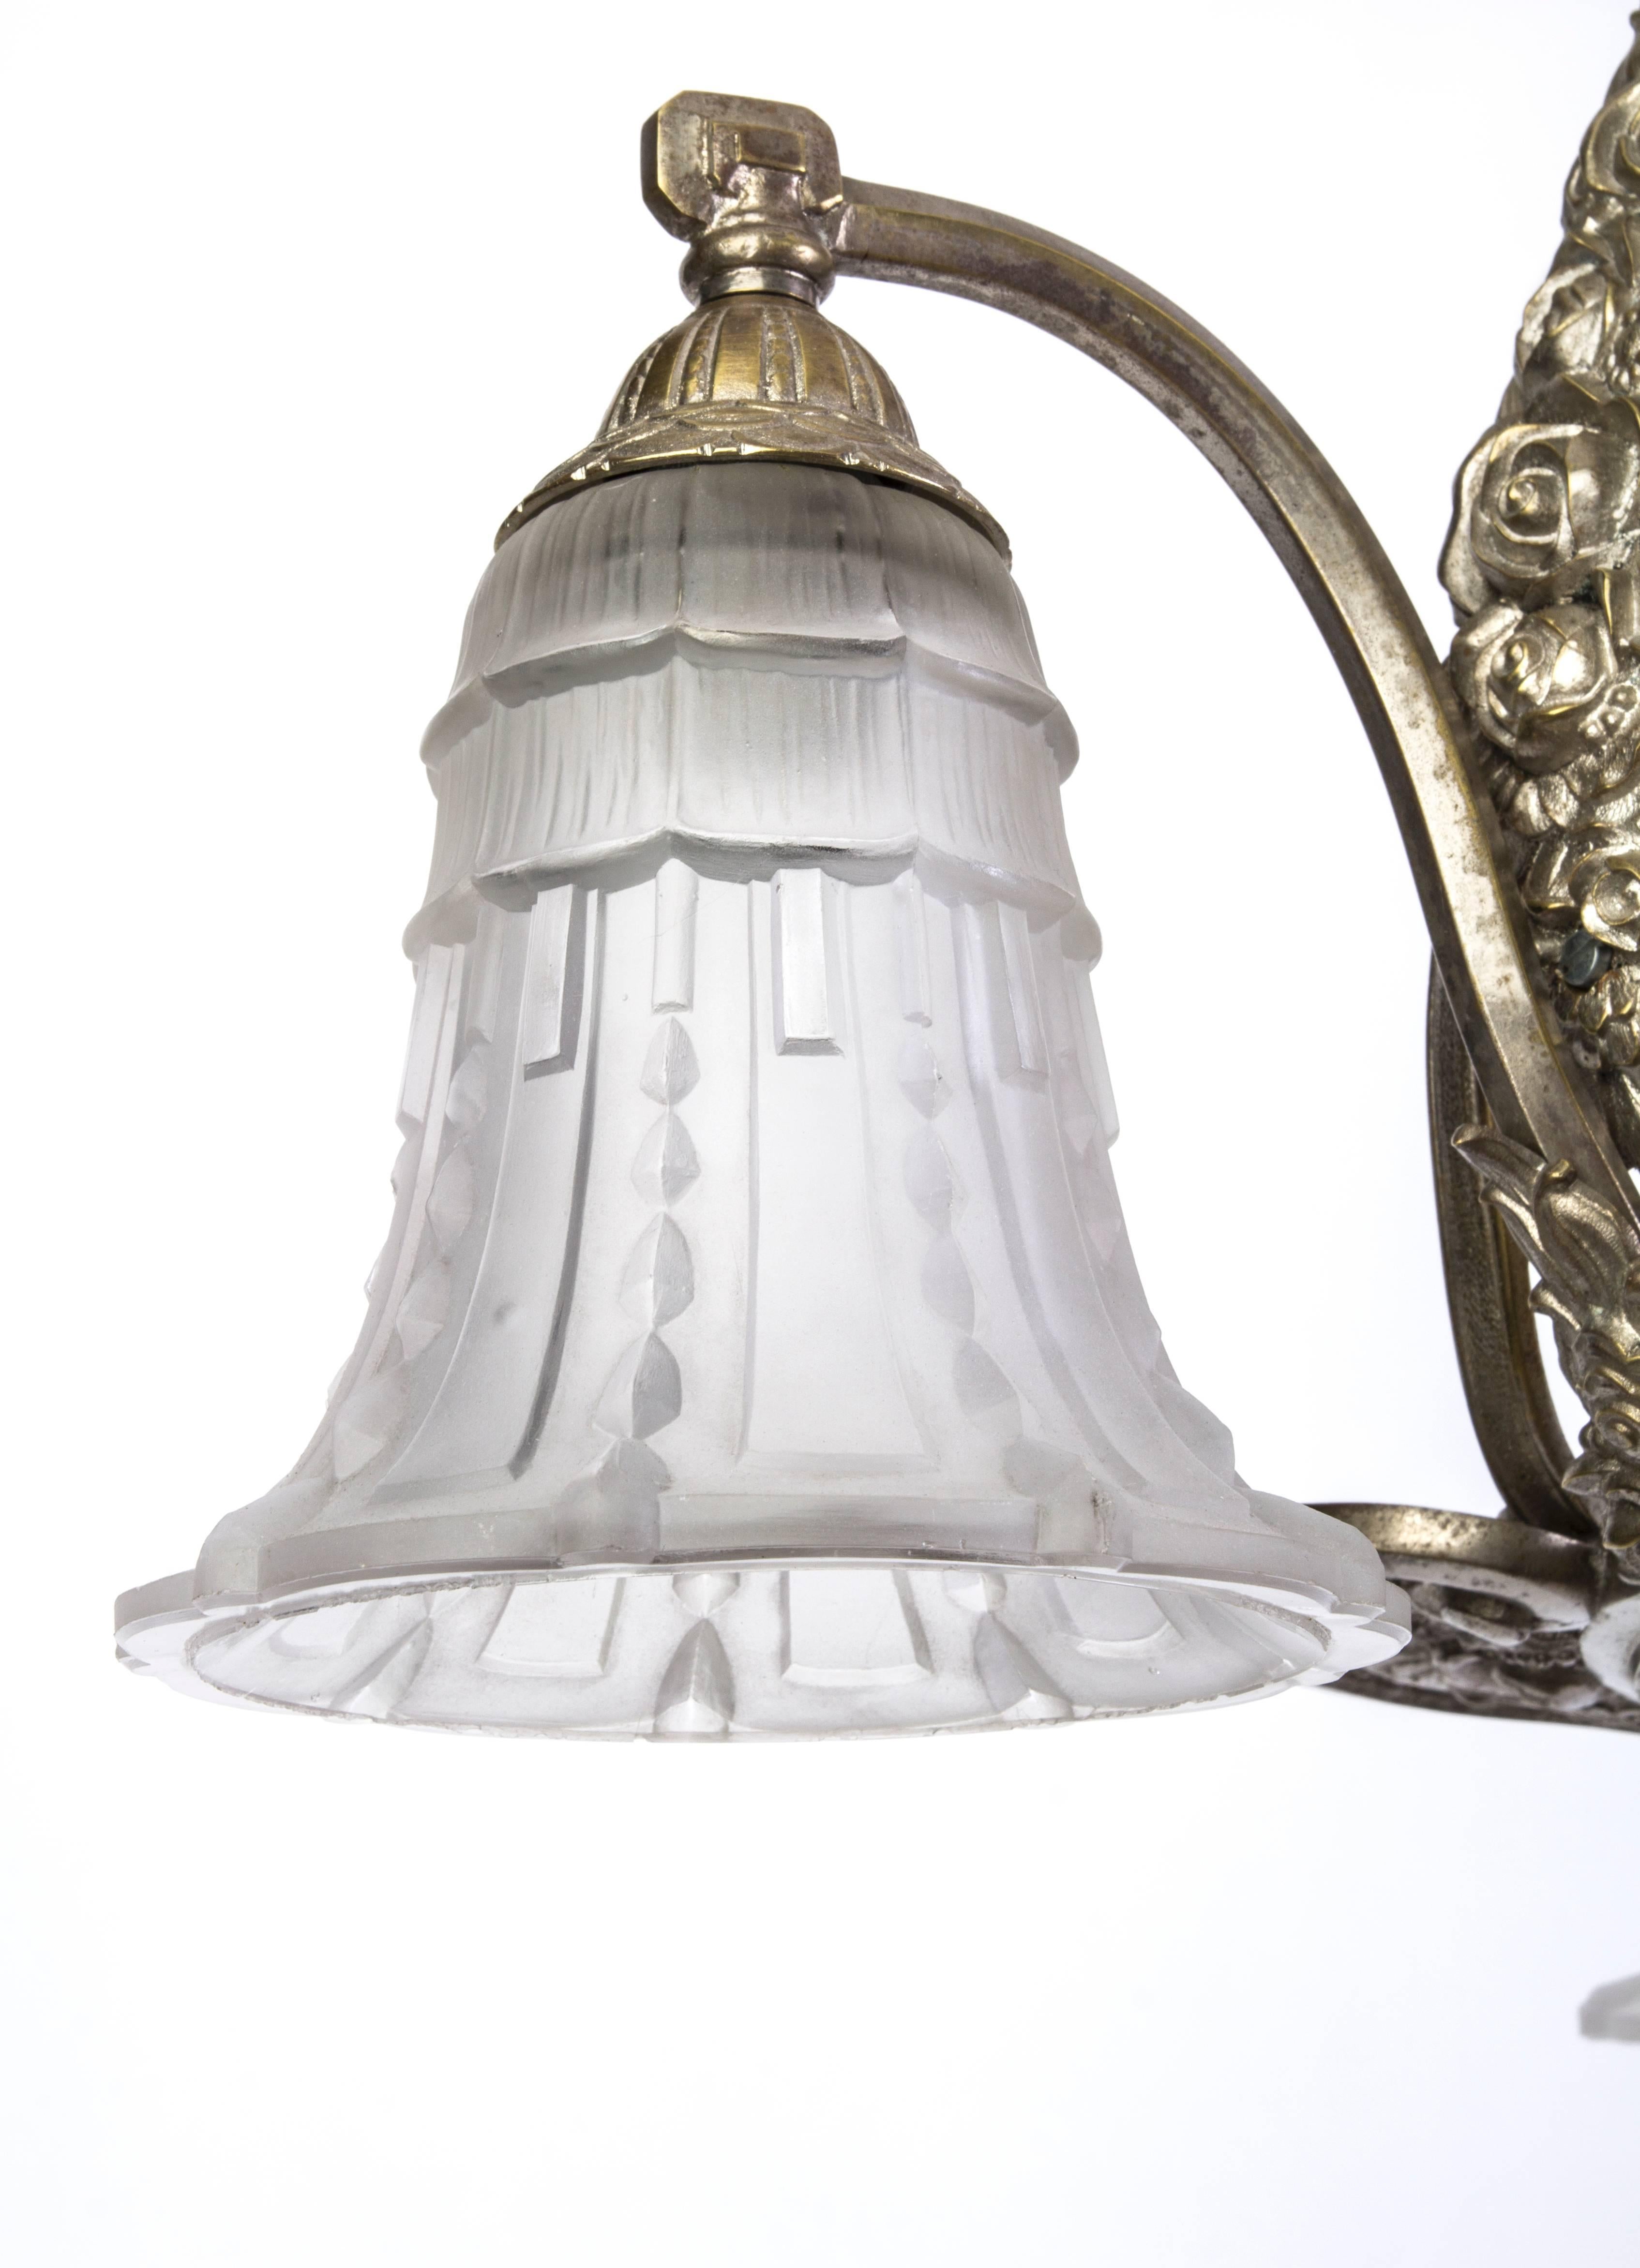 This stunning early French Art Deco chandelier features a nickel-plated bronze base with stylized floral detailing and relief frosted glass shades with geometrical motifs. It is in excellent condition.